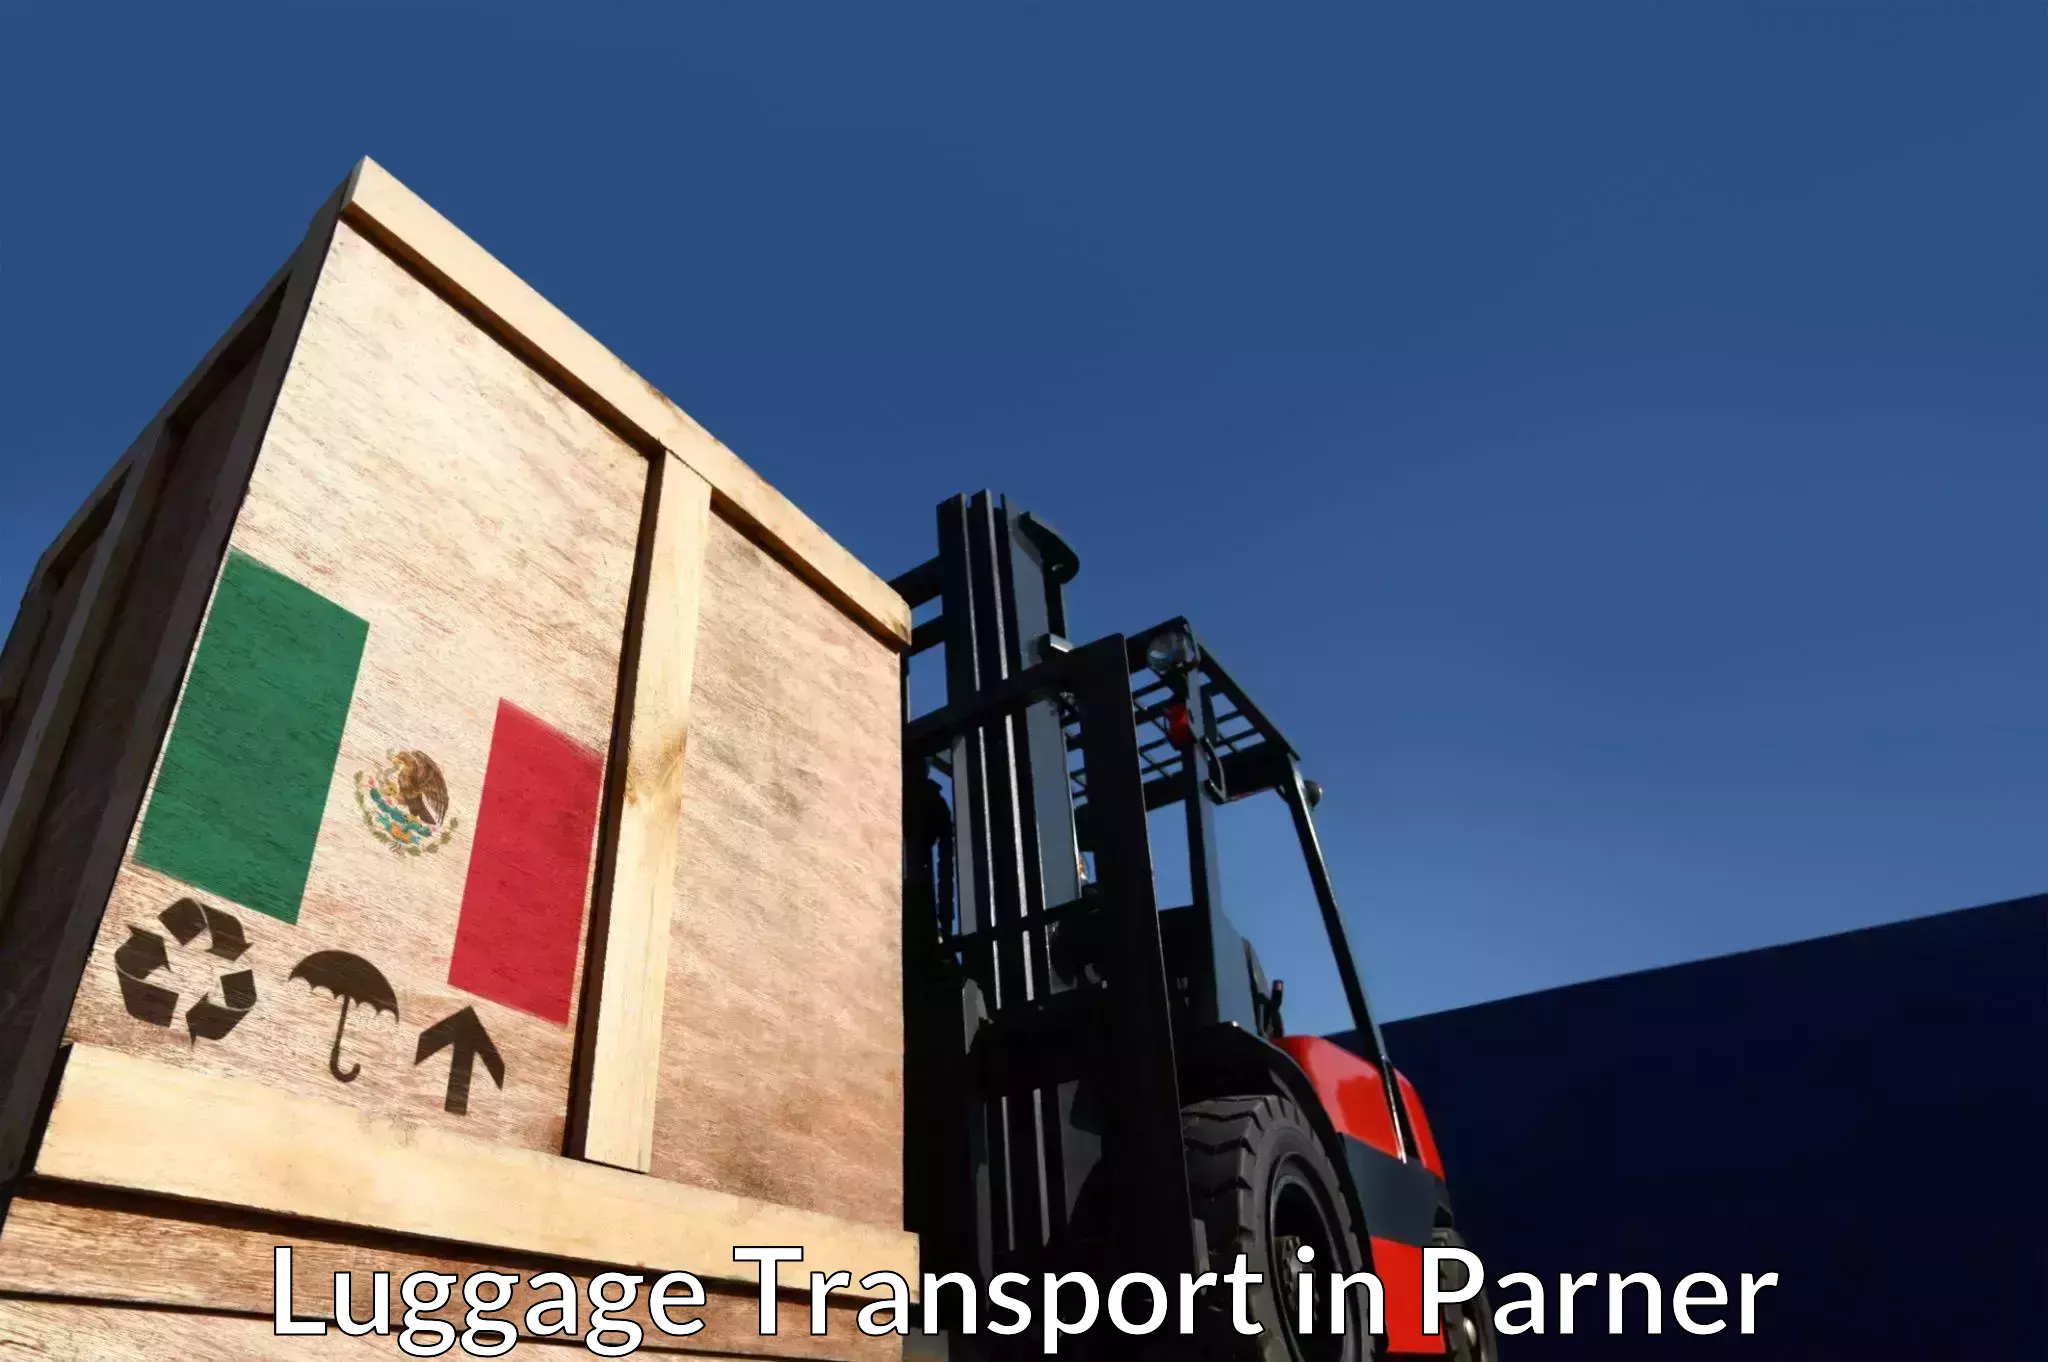 Instant baggage transport quote in Parner